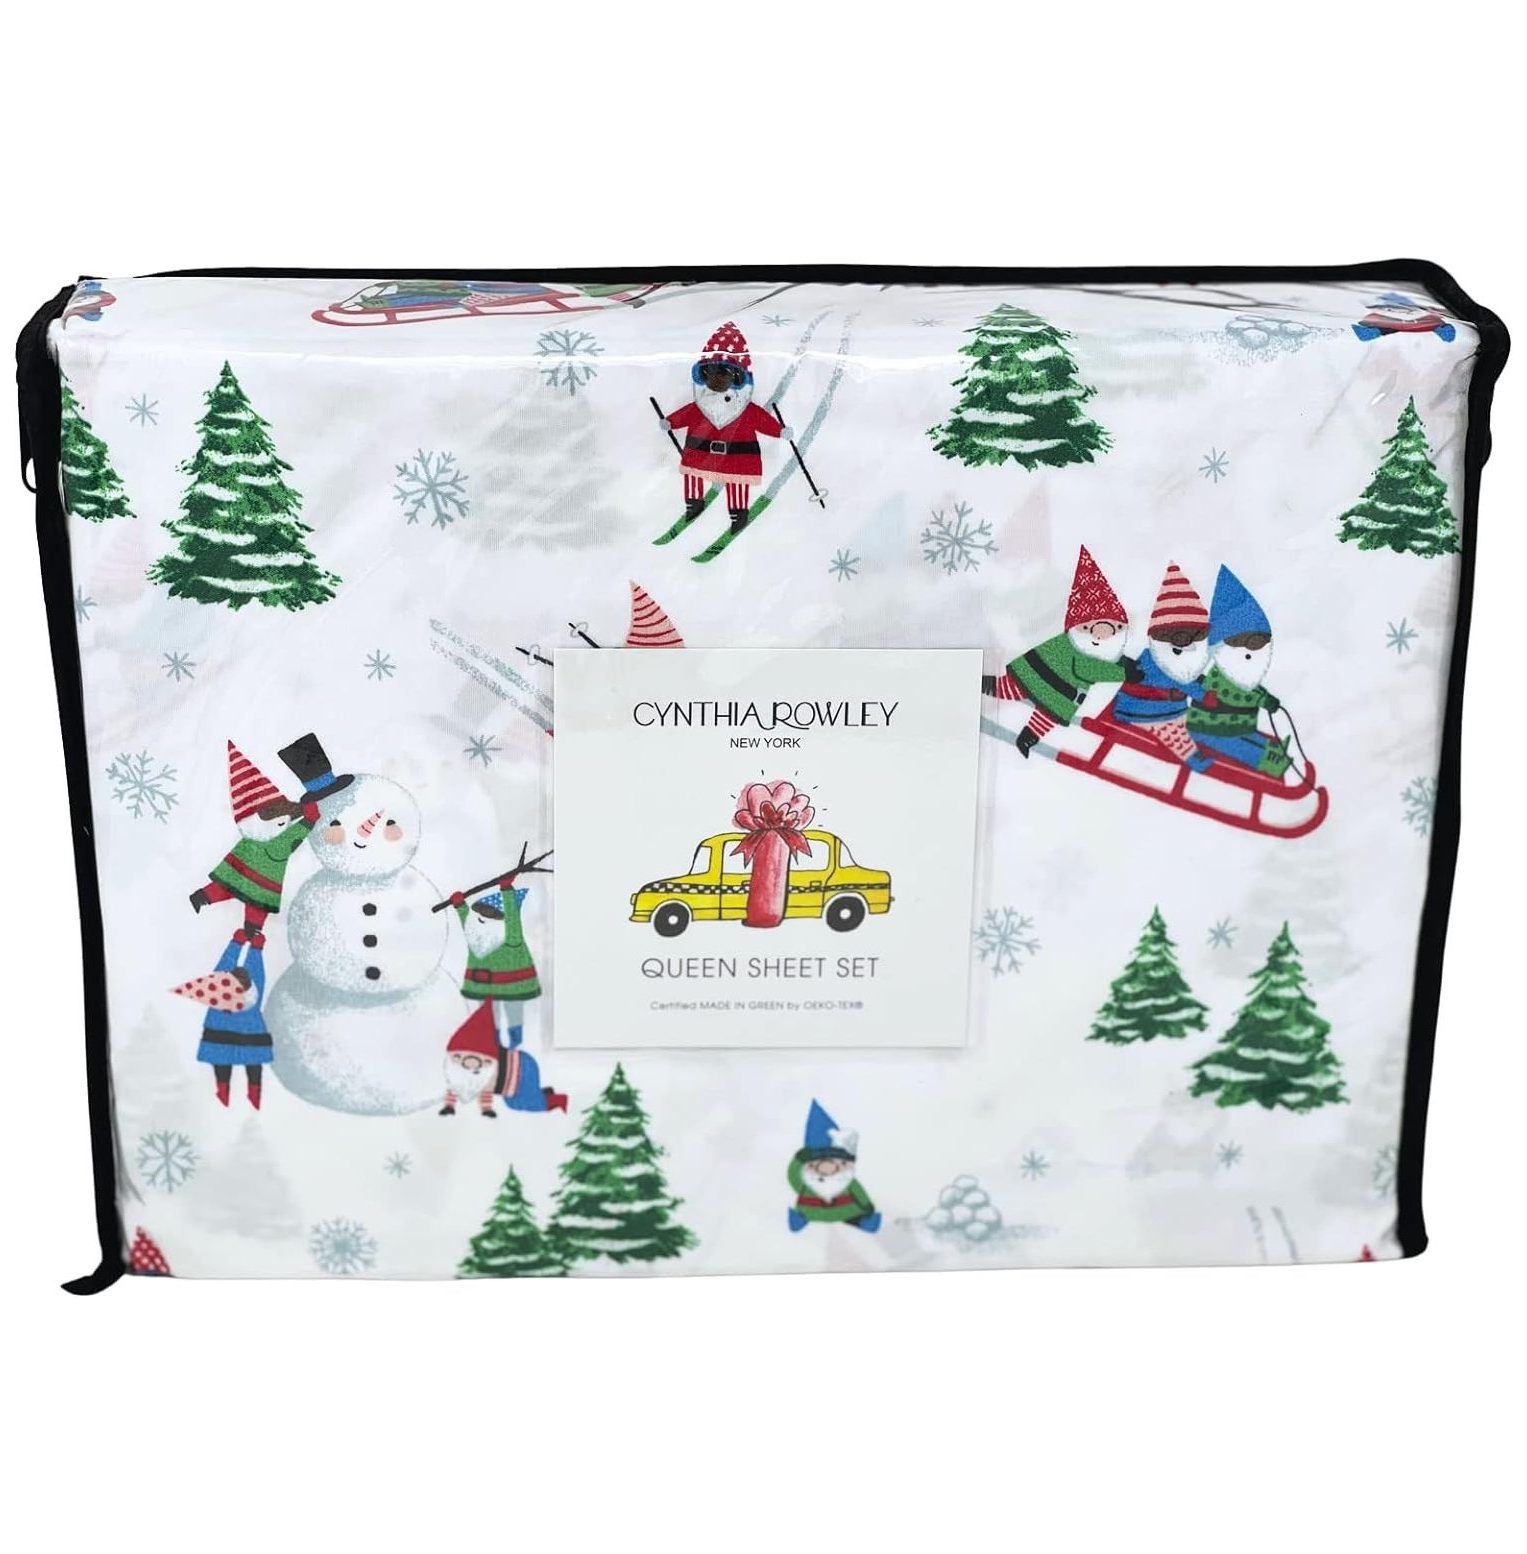 Cynthia Rowley 4 Pice Skiing Christmas Gnomes Festive Elves Trees Snowflakes Easy Care Wrinkle Free Winter Holiday Sheet Set (Queen (U.S. Standard)) - image 1 of 3